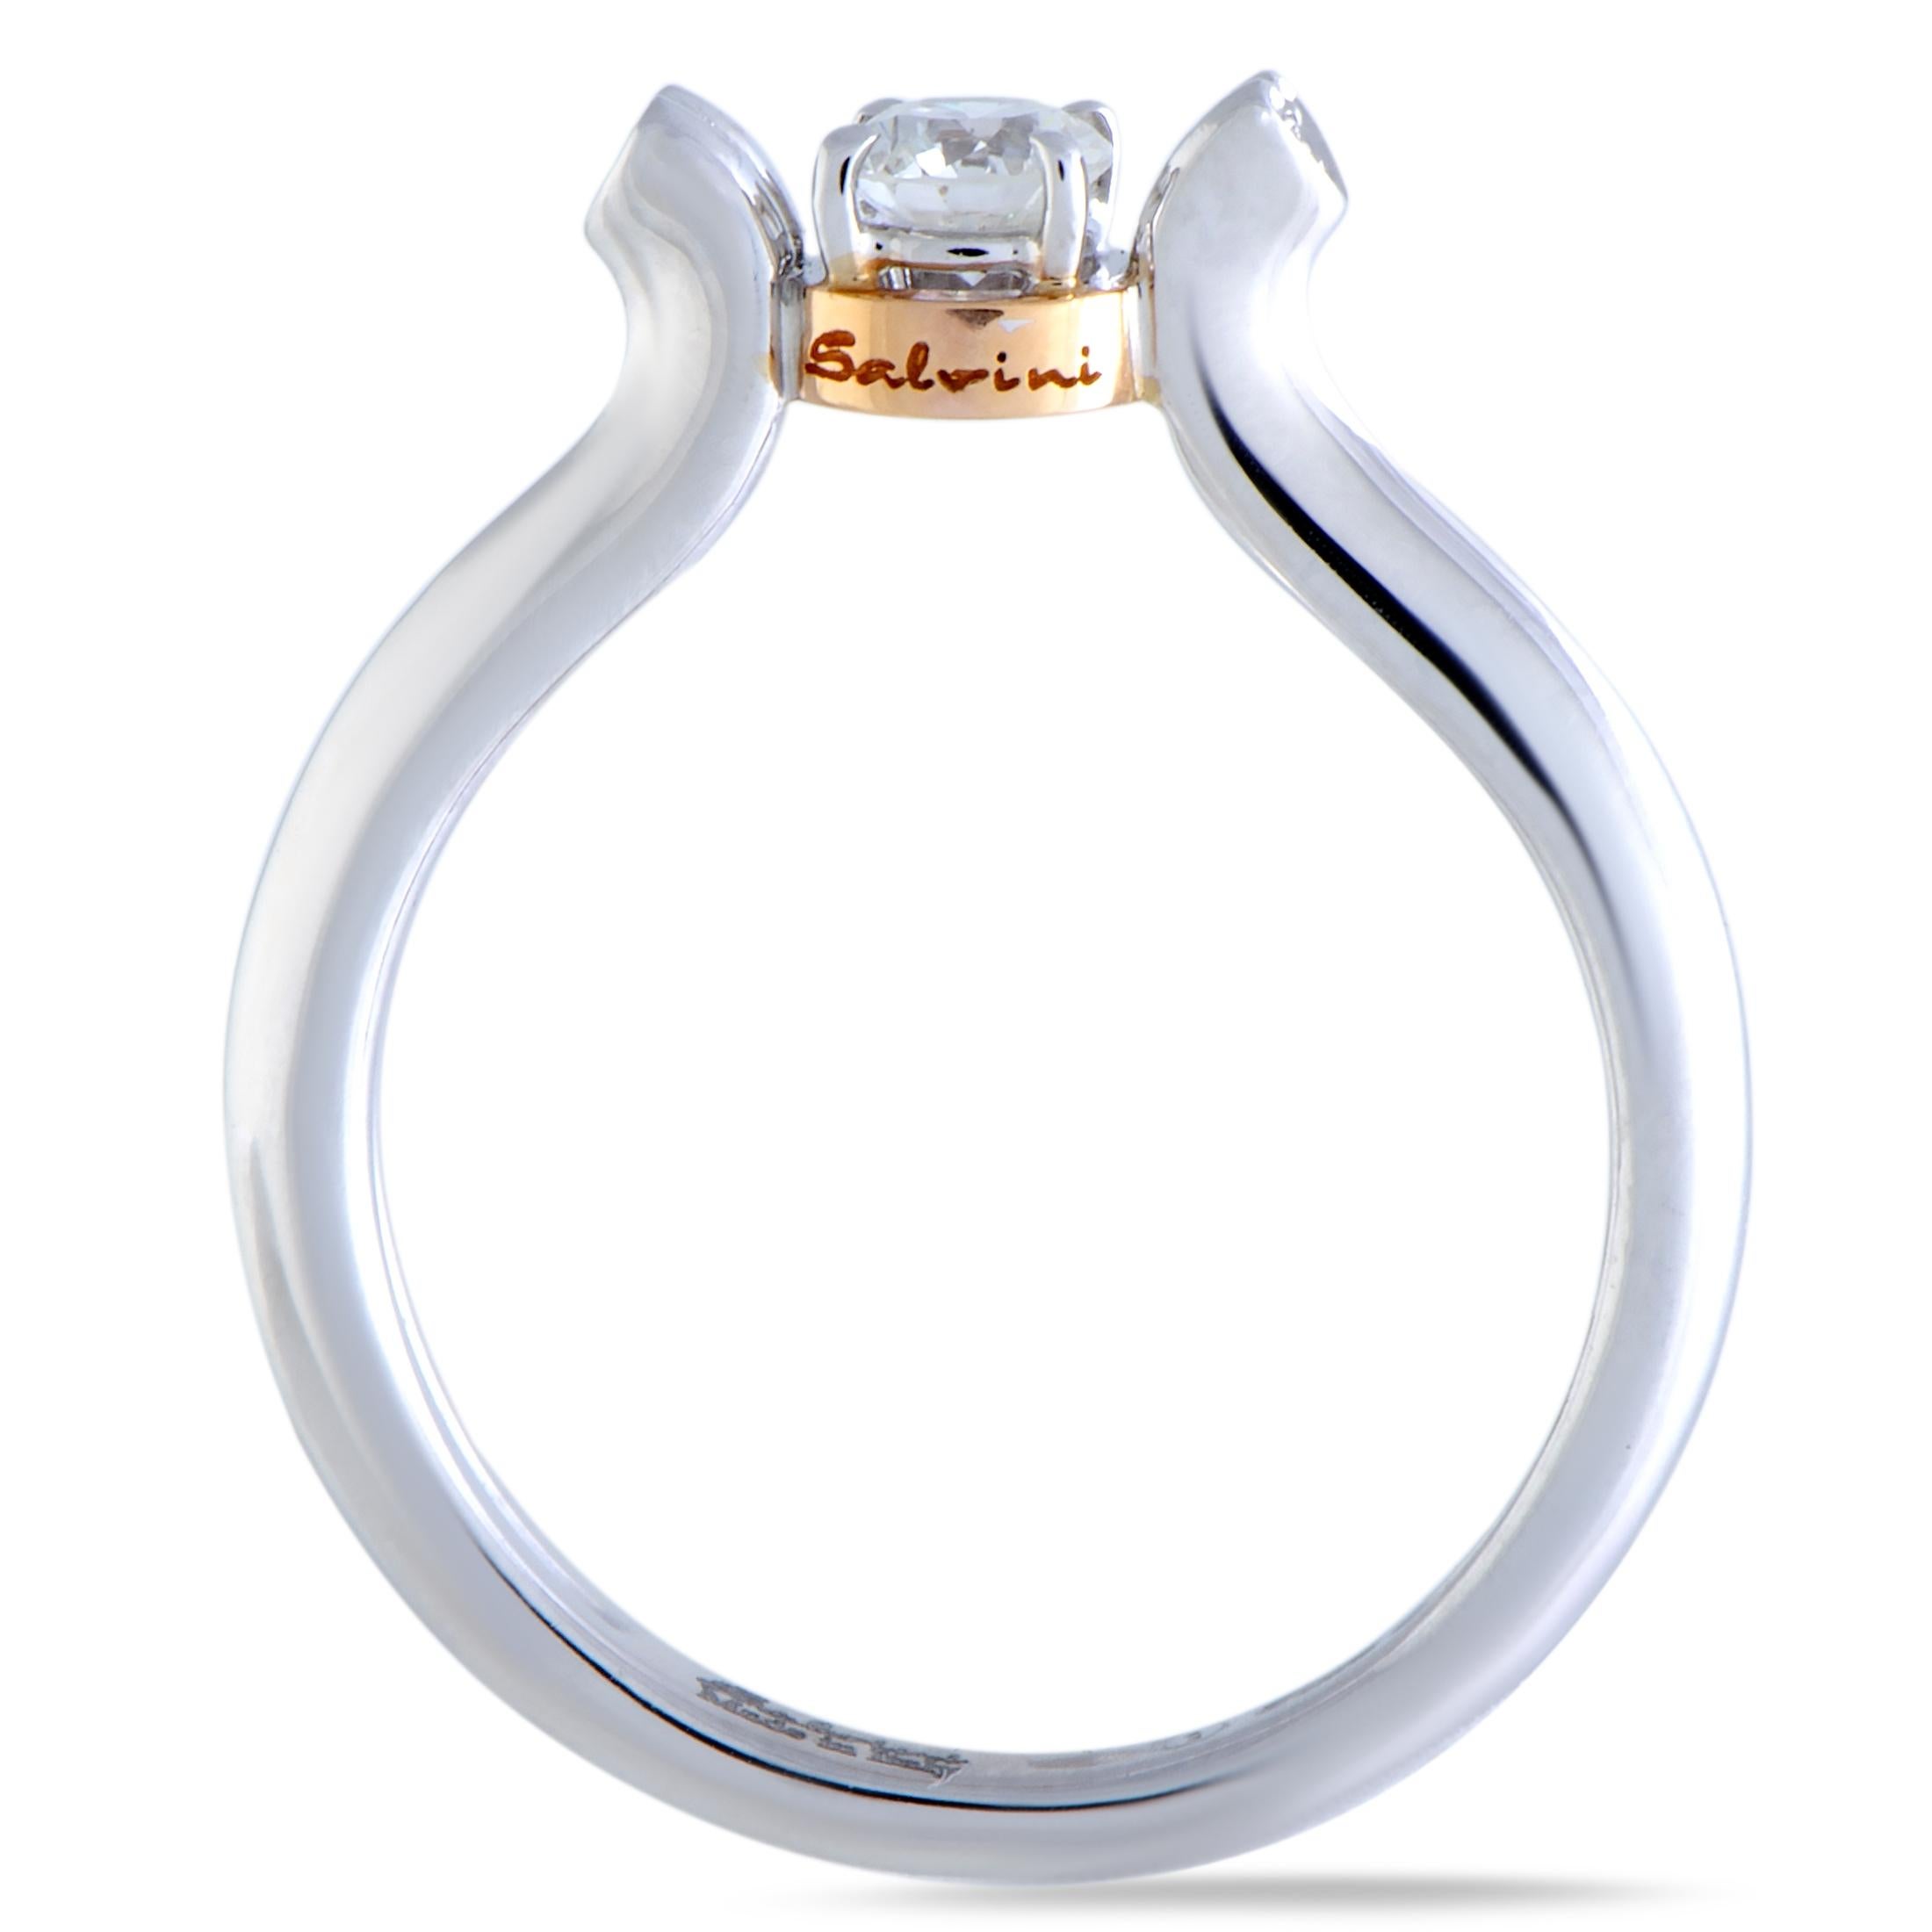 Refined elegance and understated prestige are entwined in this fascinating Salvini ring that is beautifully made of 18K white and 18K rose gold, offering a look of utmost sophistication. The ring is set with scintillating diamonds that amount to